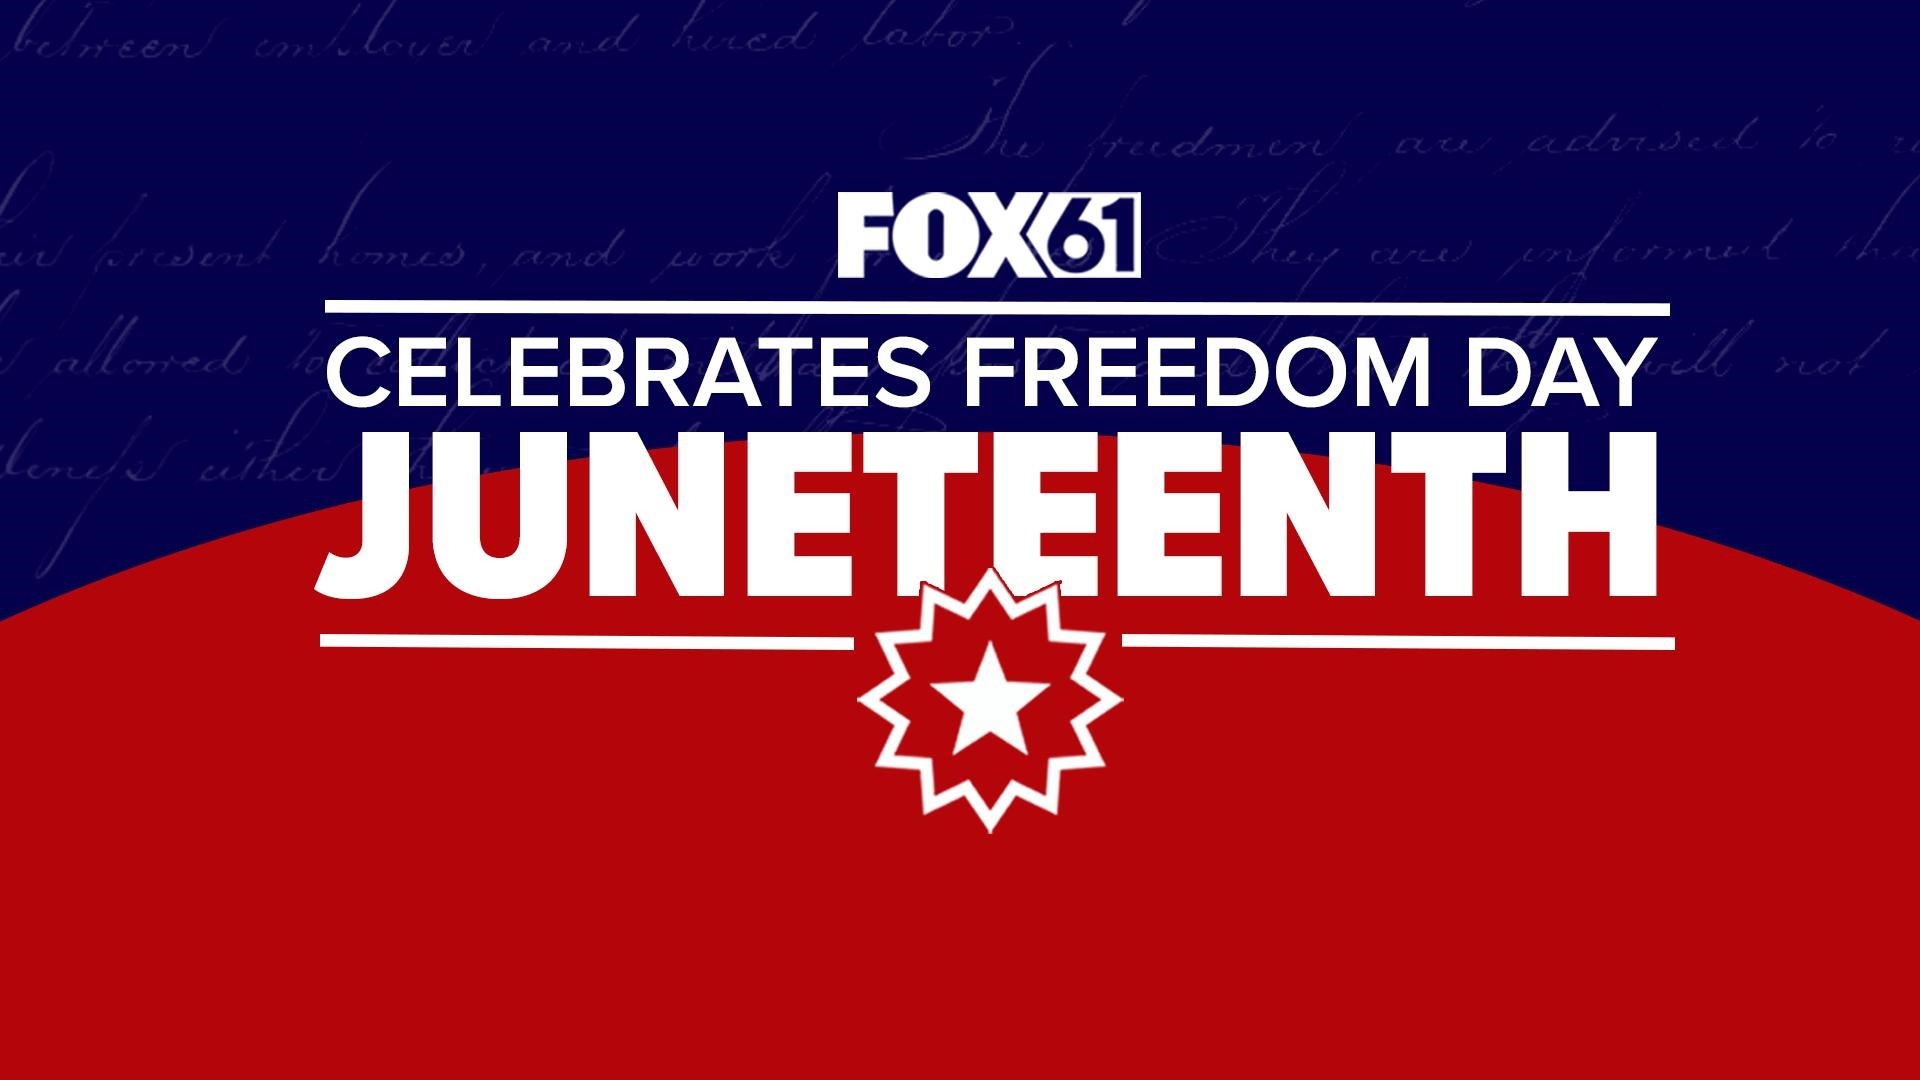 Juneteenth: FOX61 Celebrates Freedom day explores in what ways Connecticut marks the first time the holiday is recognized both as a state and federal holiday.